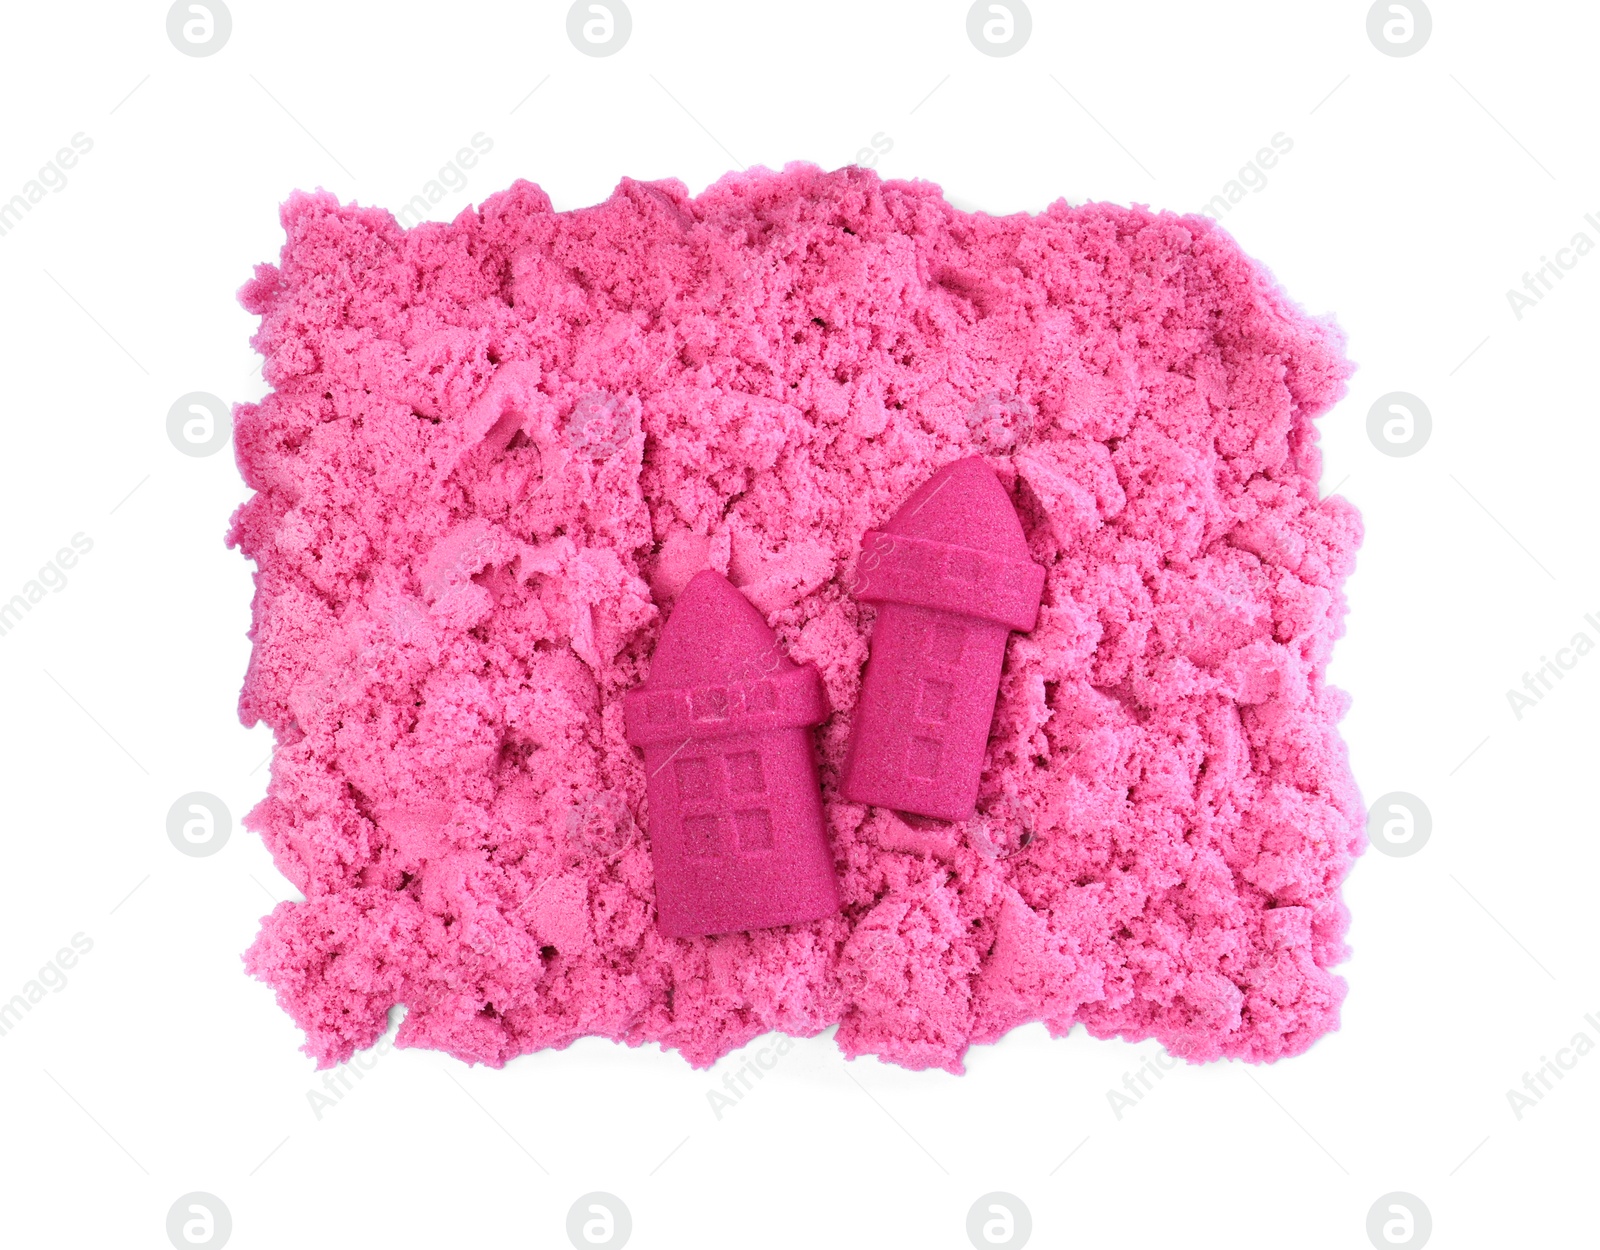 Photo of Castles made of kinetic sand on white background, top view